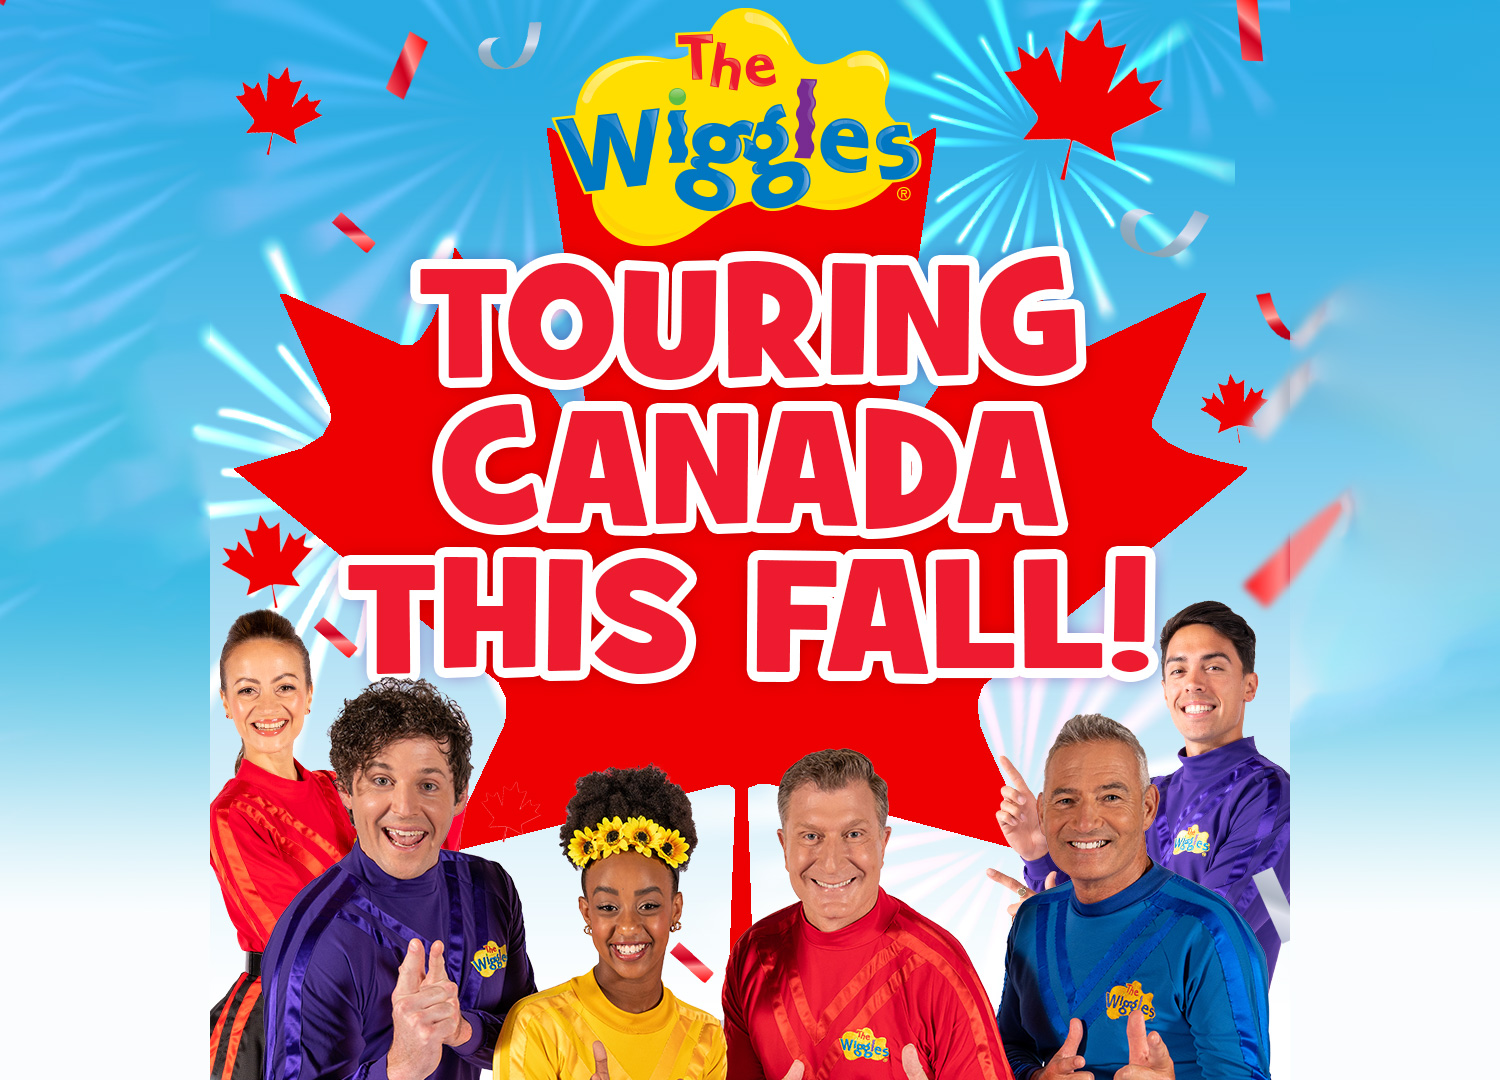 The Wiggles Big Show Tour Coming to Winnipeg October 20, 2022